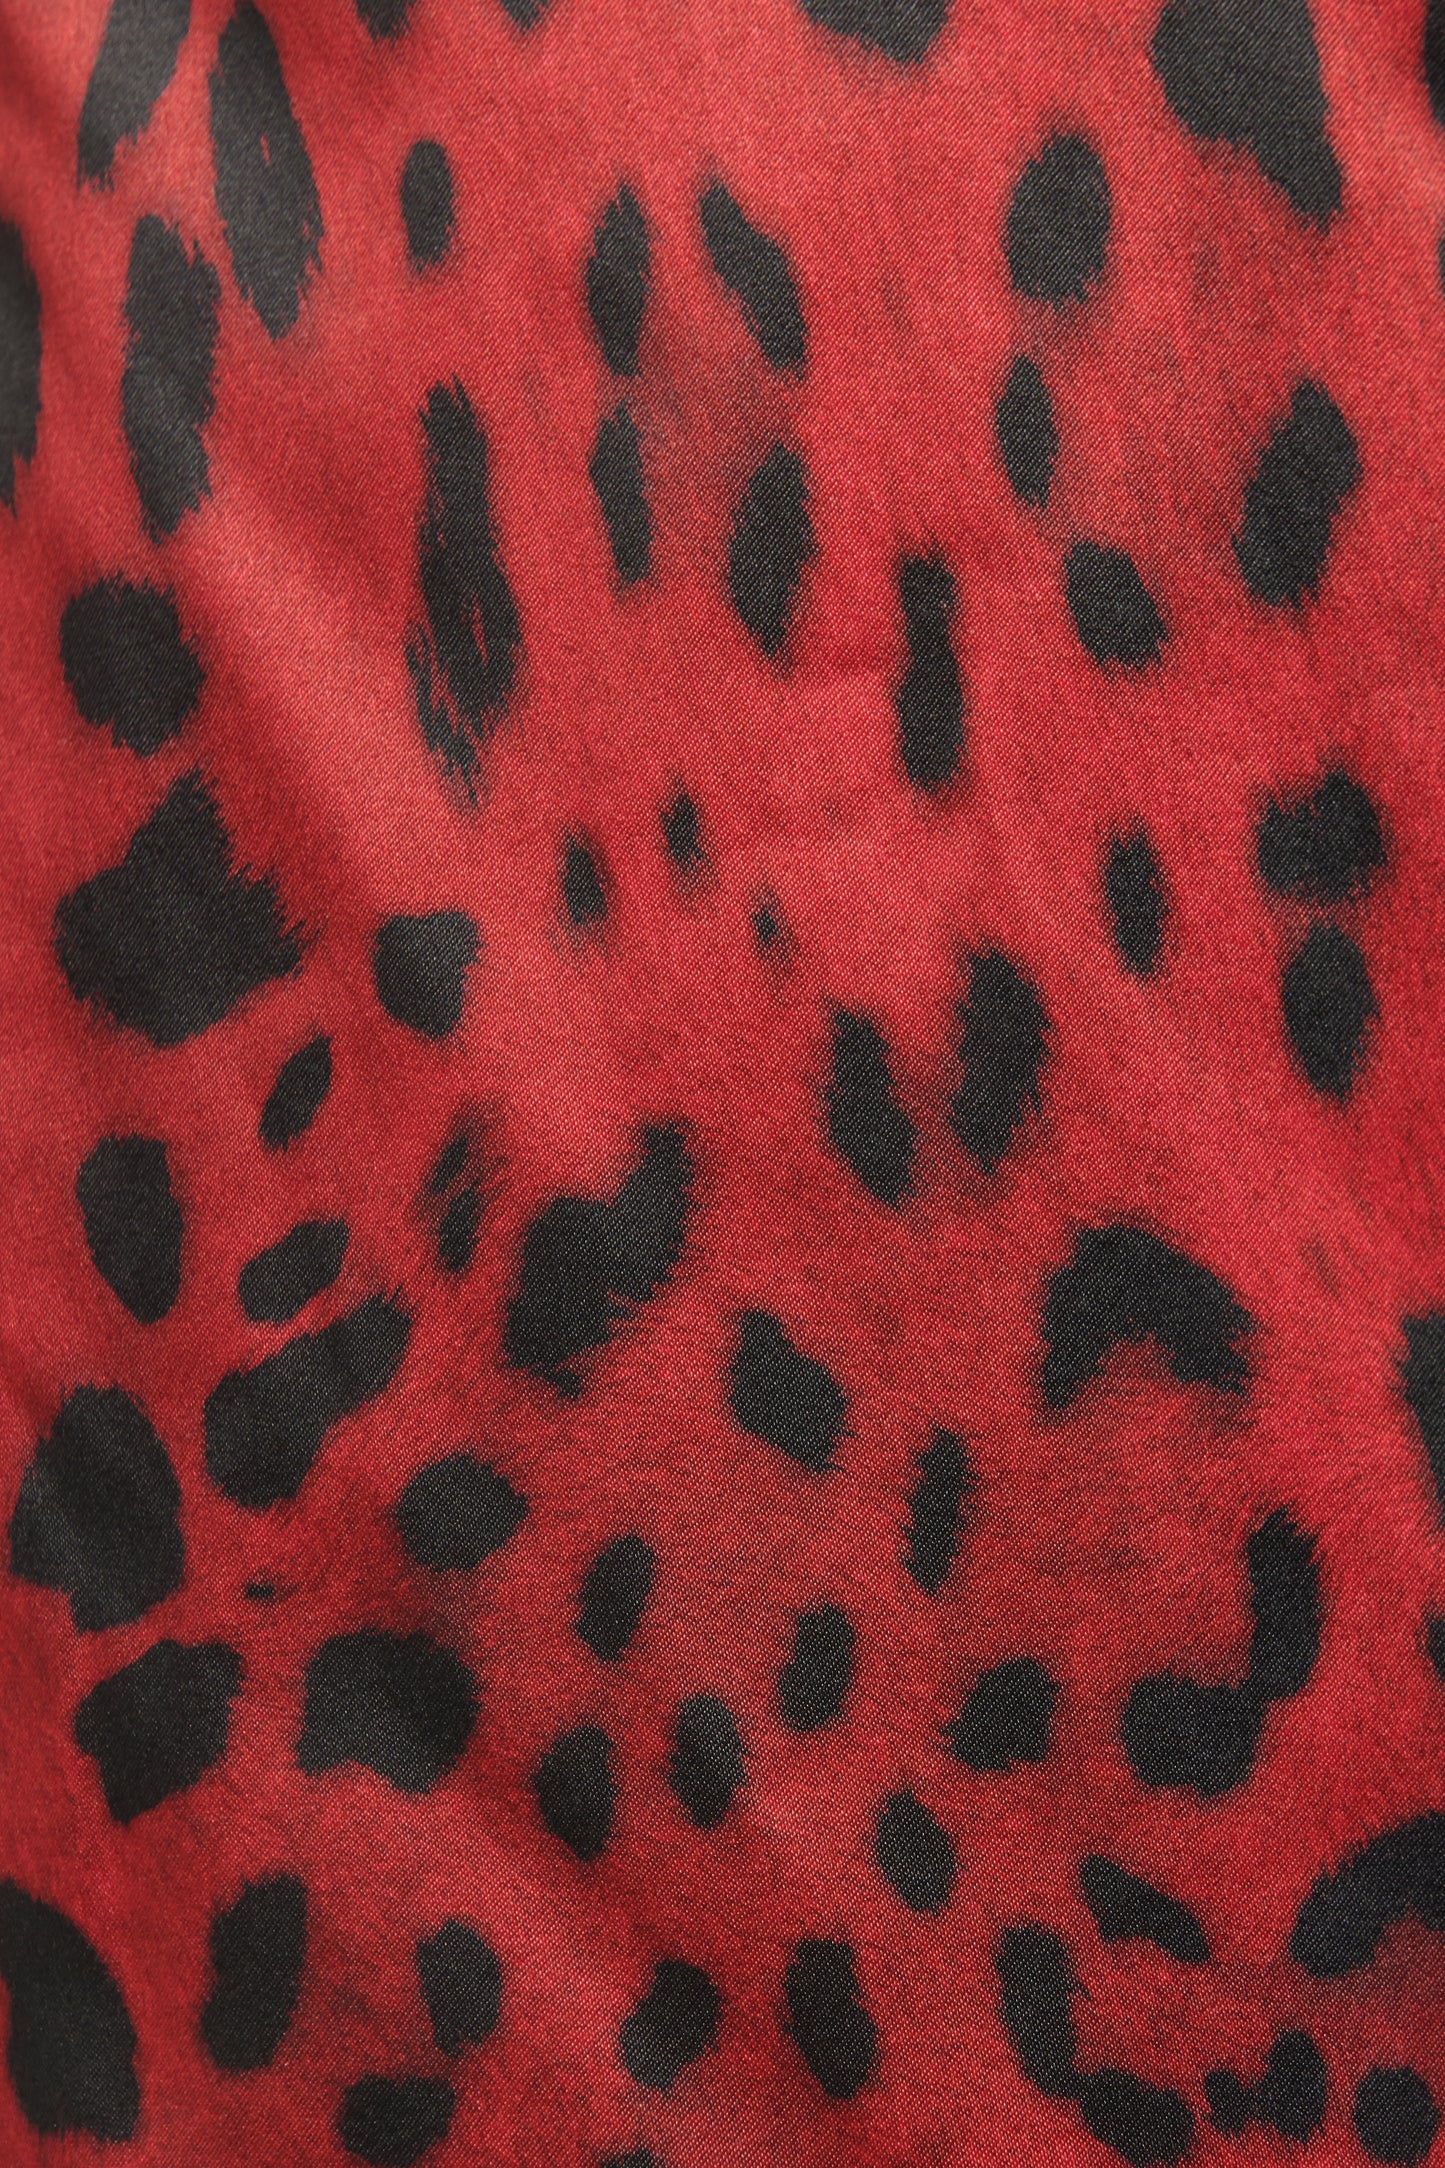 Red Animal Print Preowned Bustier Dress